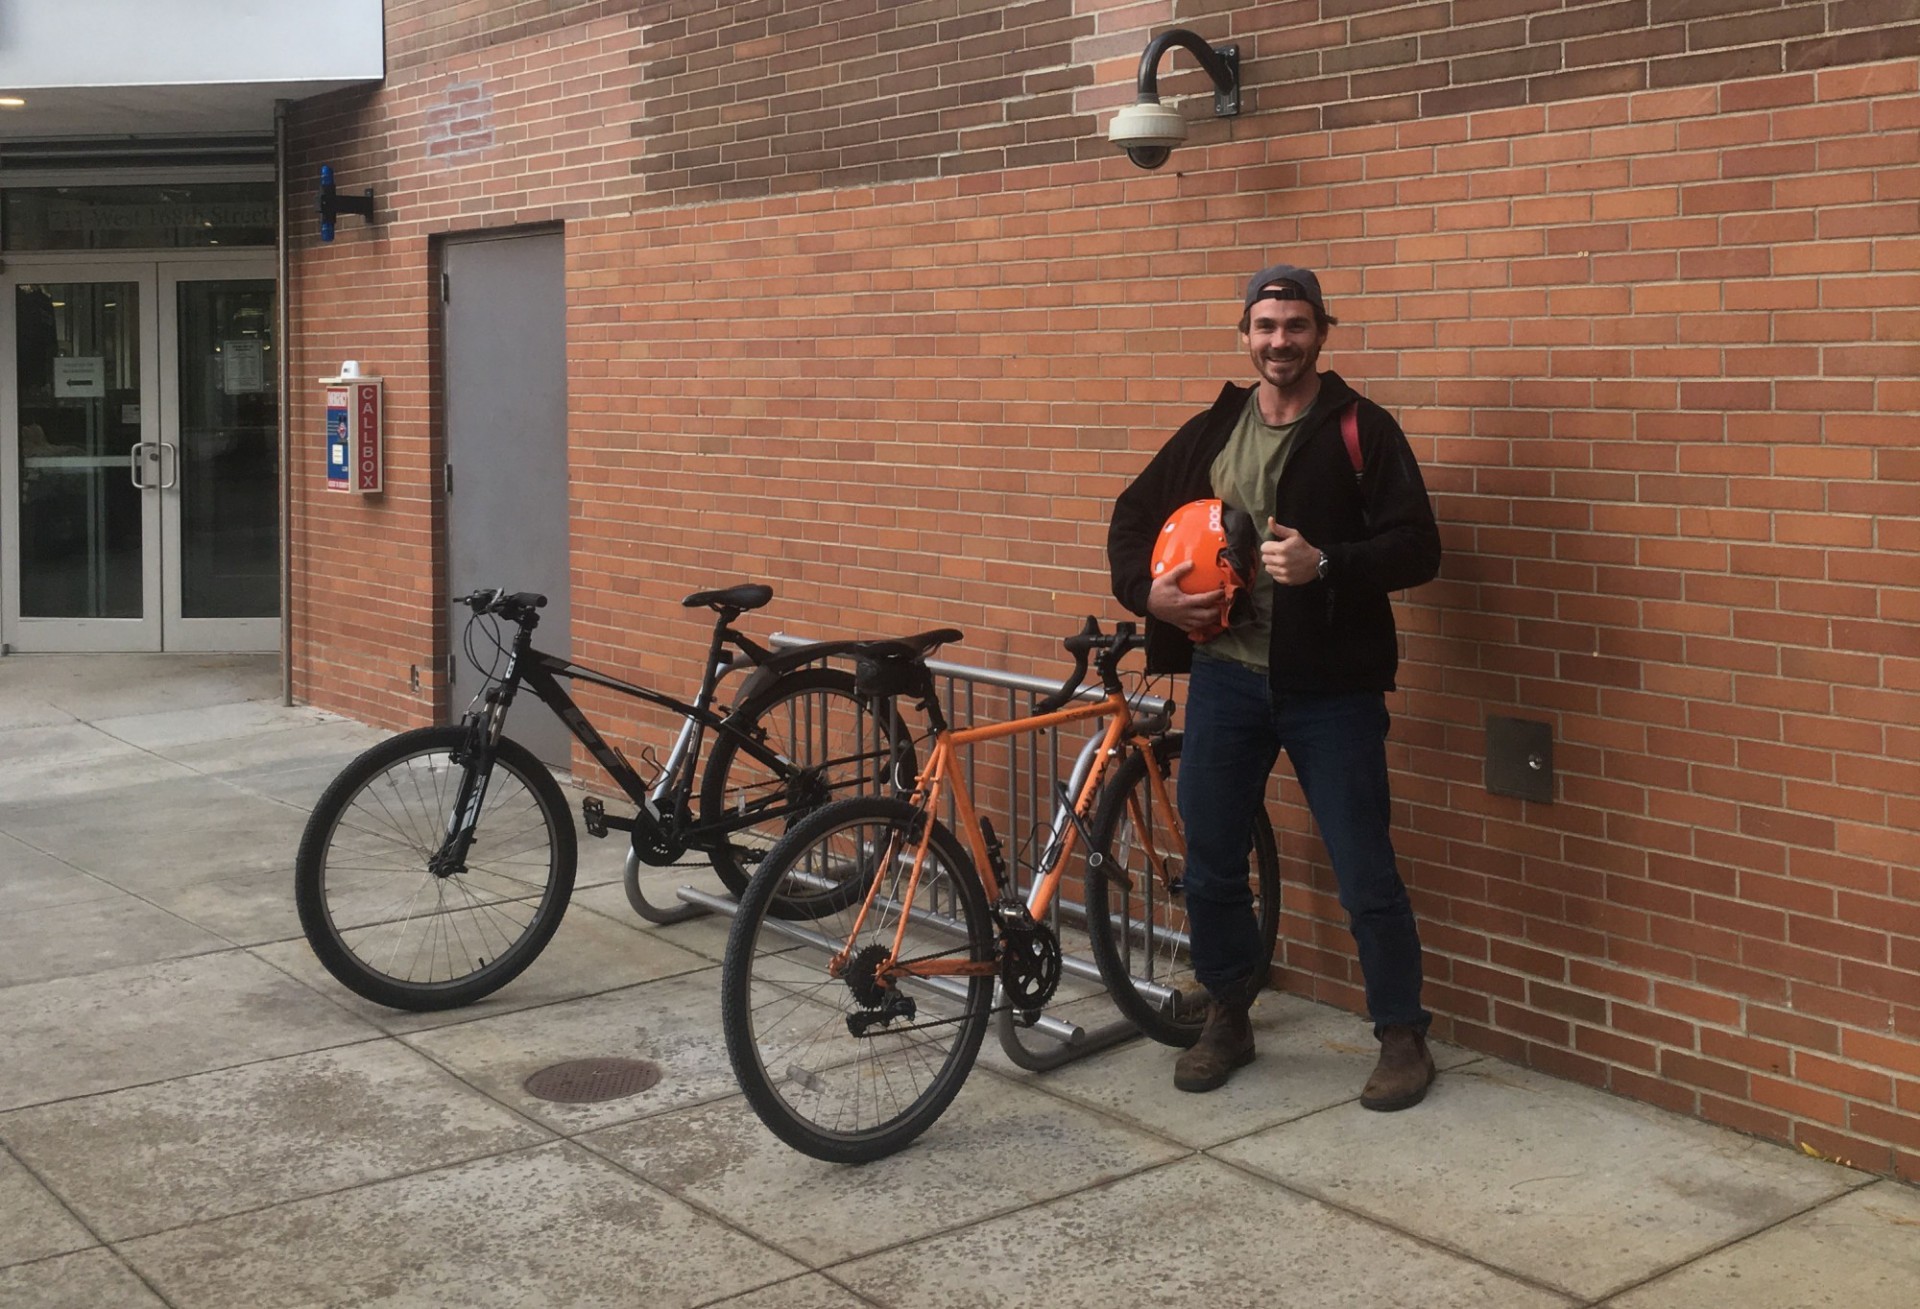 William Forsyth, a second-year student in the Masters of Public Health (MPH) program at the Medical Center campus, takes the ferry with his bike from Red Hook, Brooklyn to Wall Street and then rides from Wall Street to CUIMC.